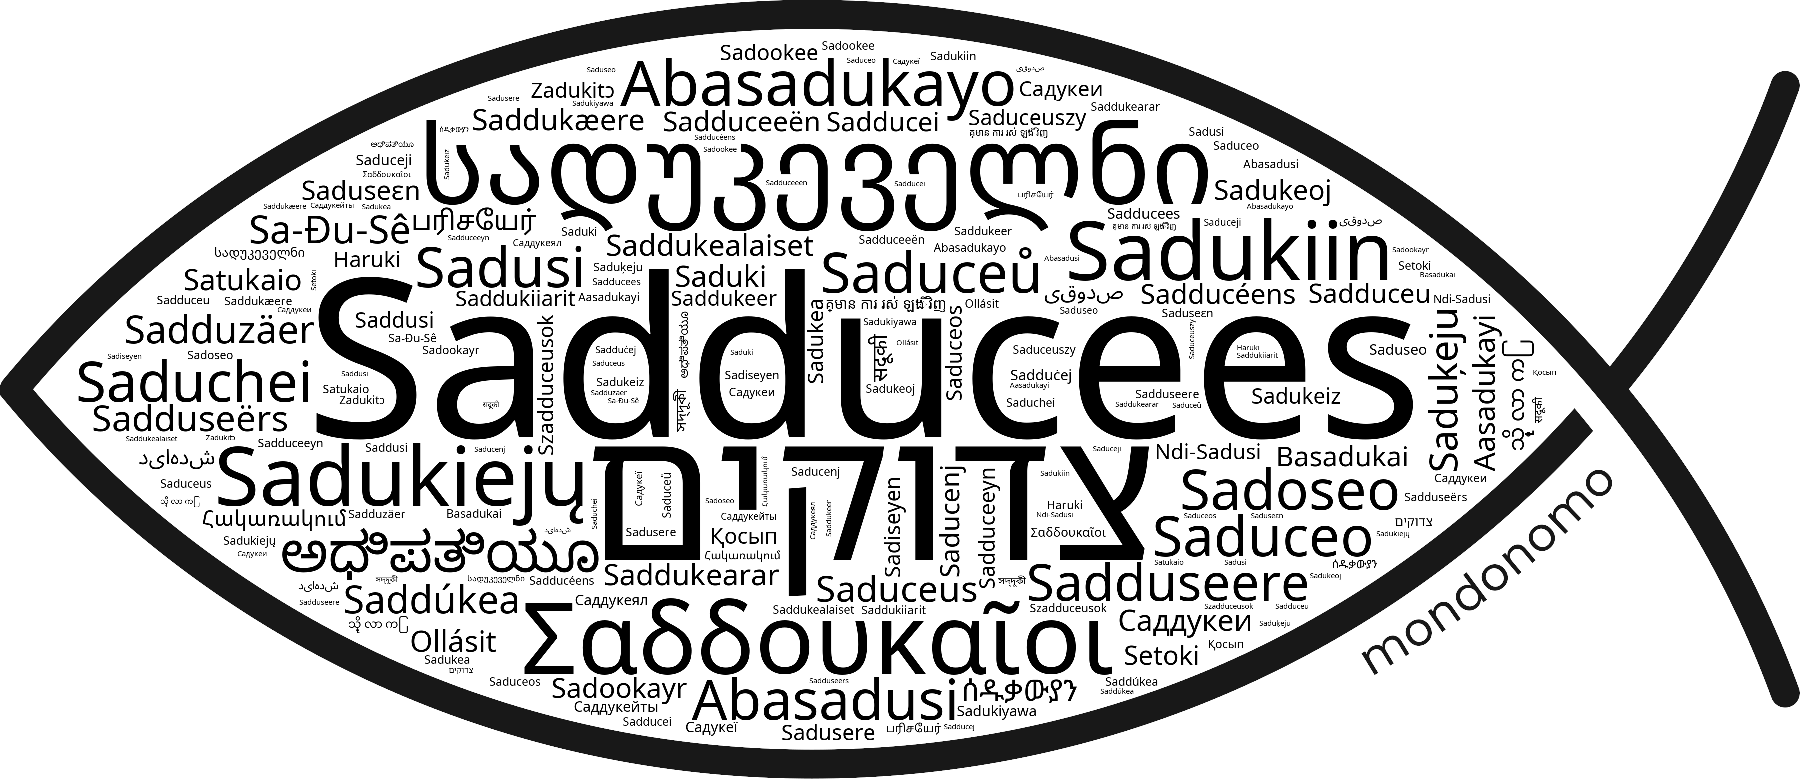 Name Sadducees in the world's Bibles